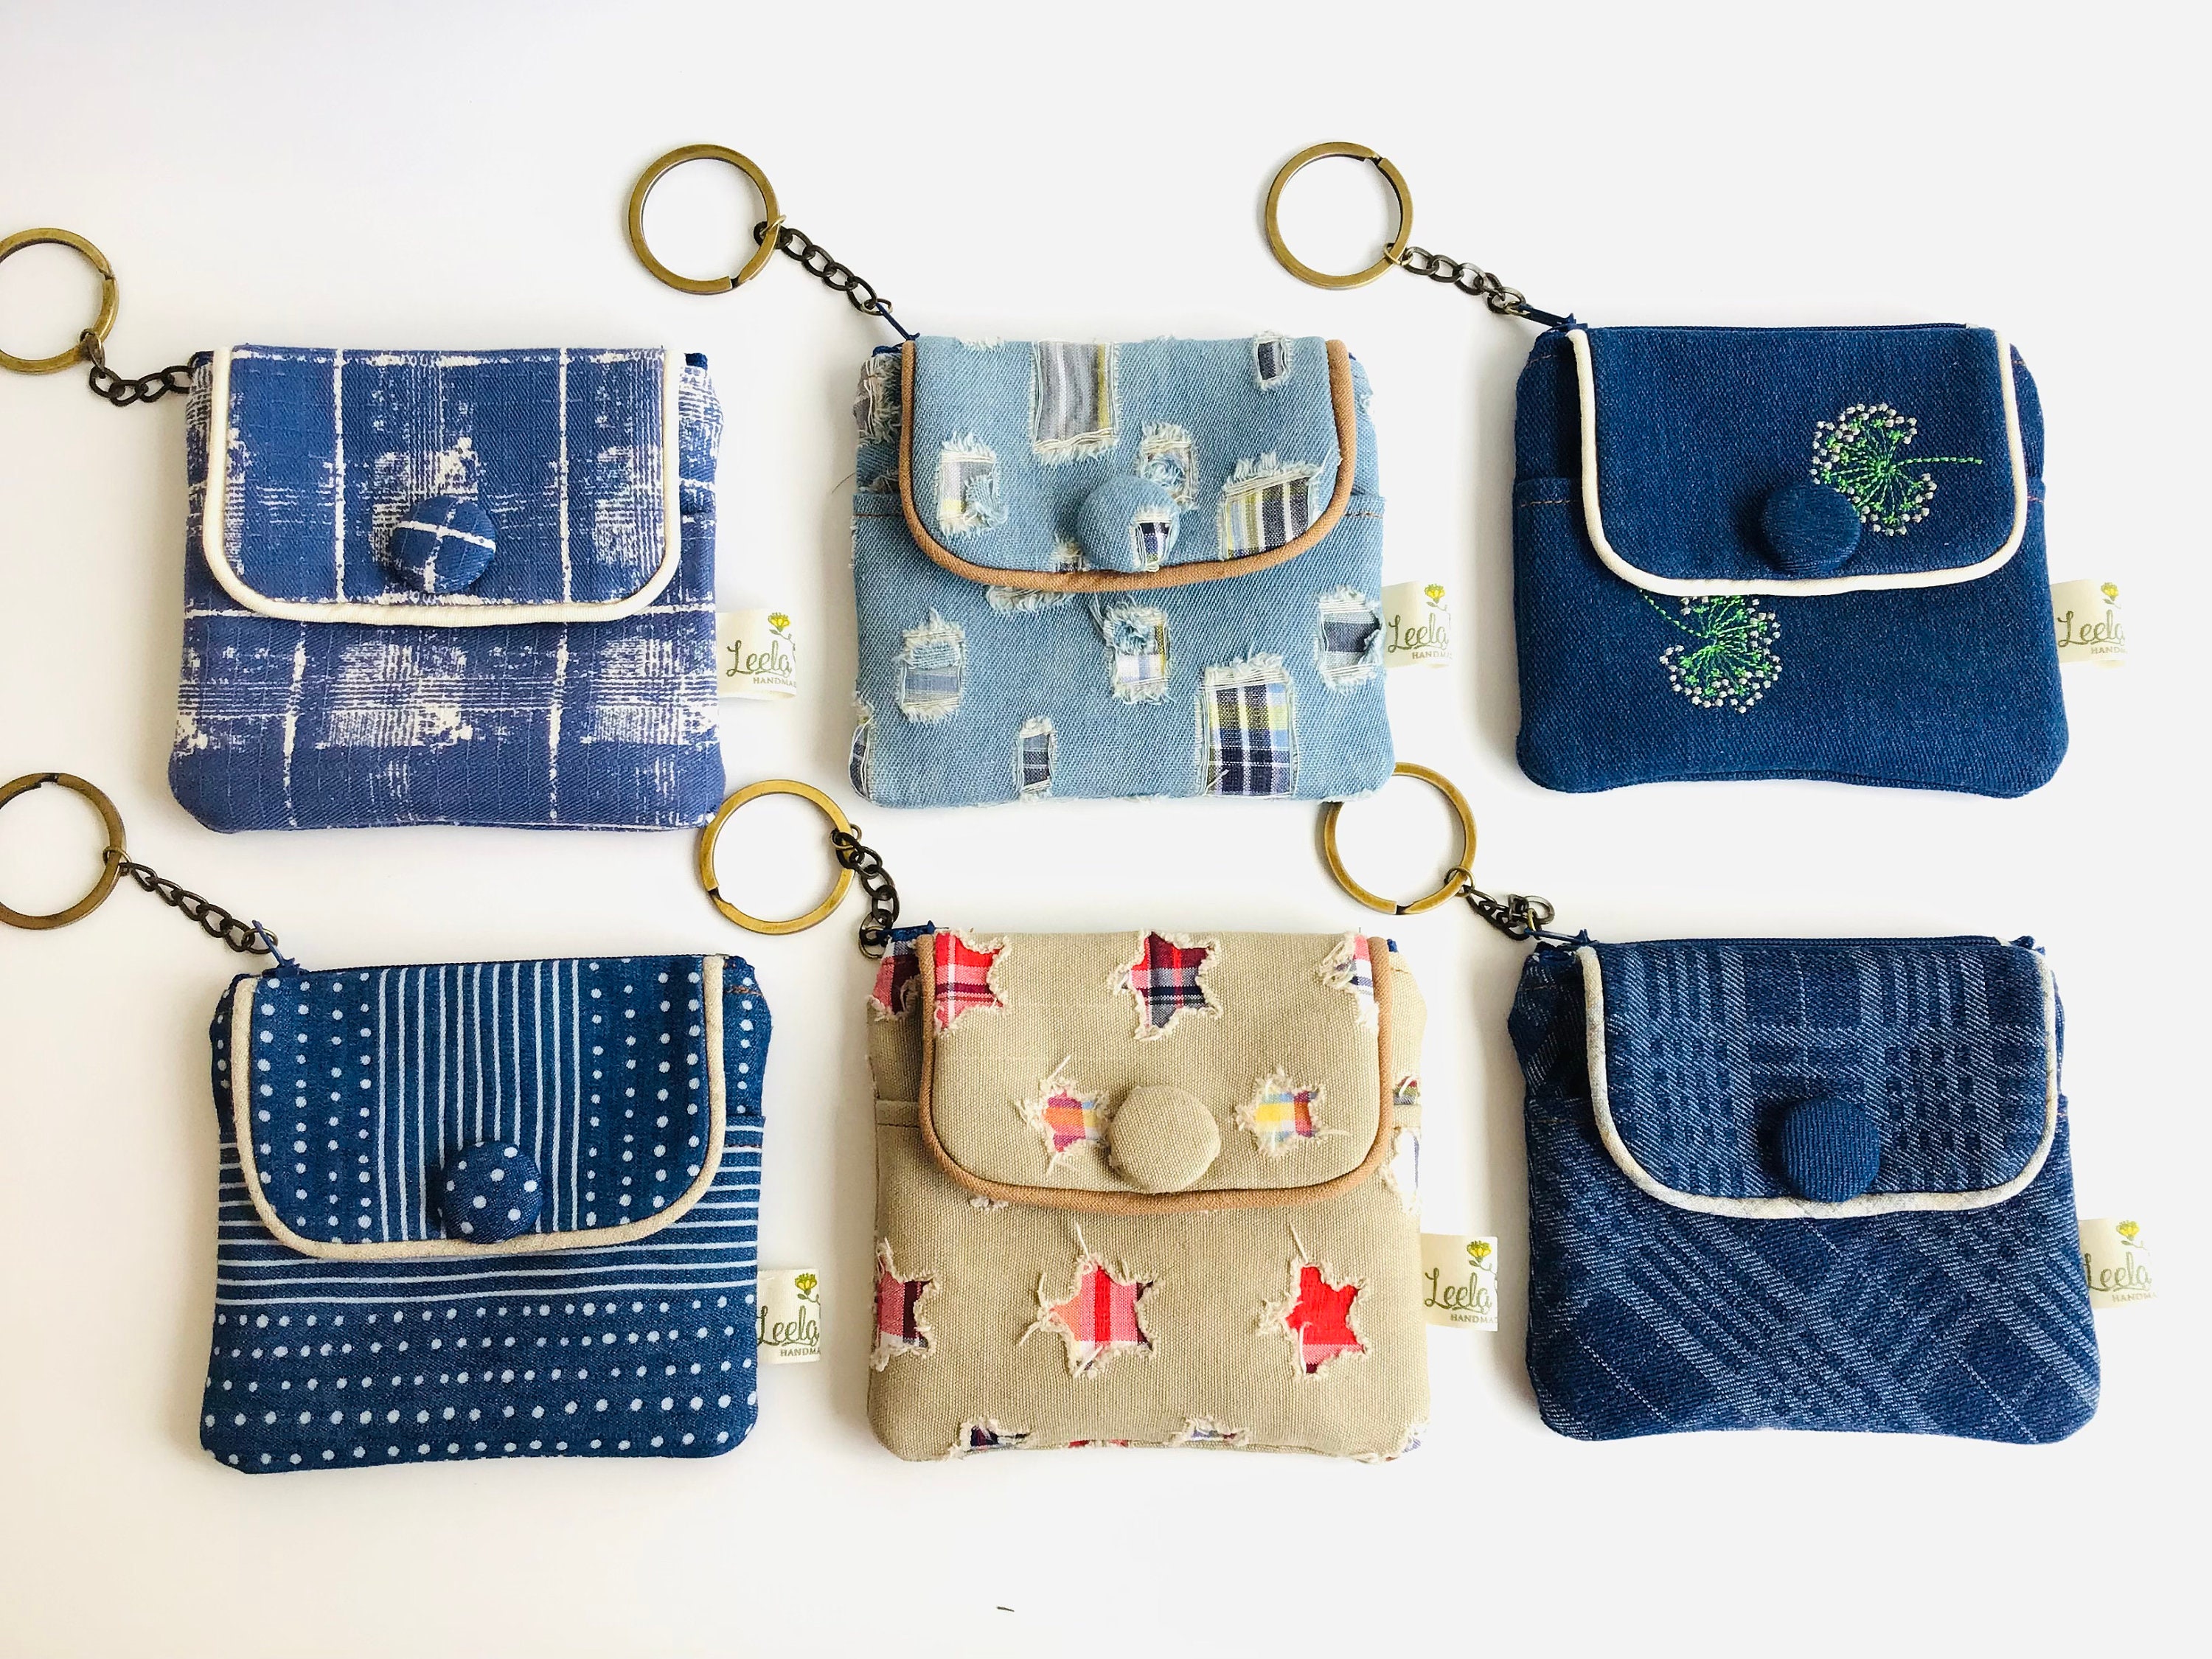  INTOA design Handmade Denim Coin Purse of Recycled Jeans,  Medium Blue : Handmade Products